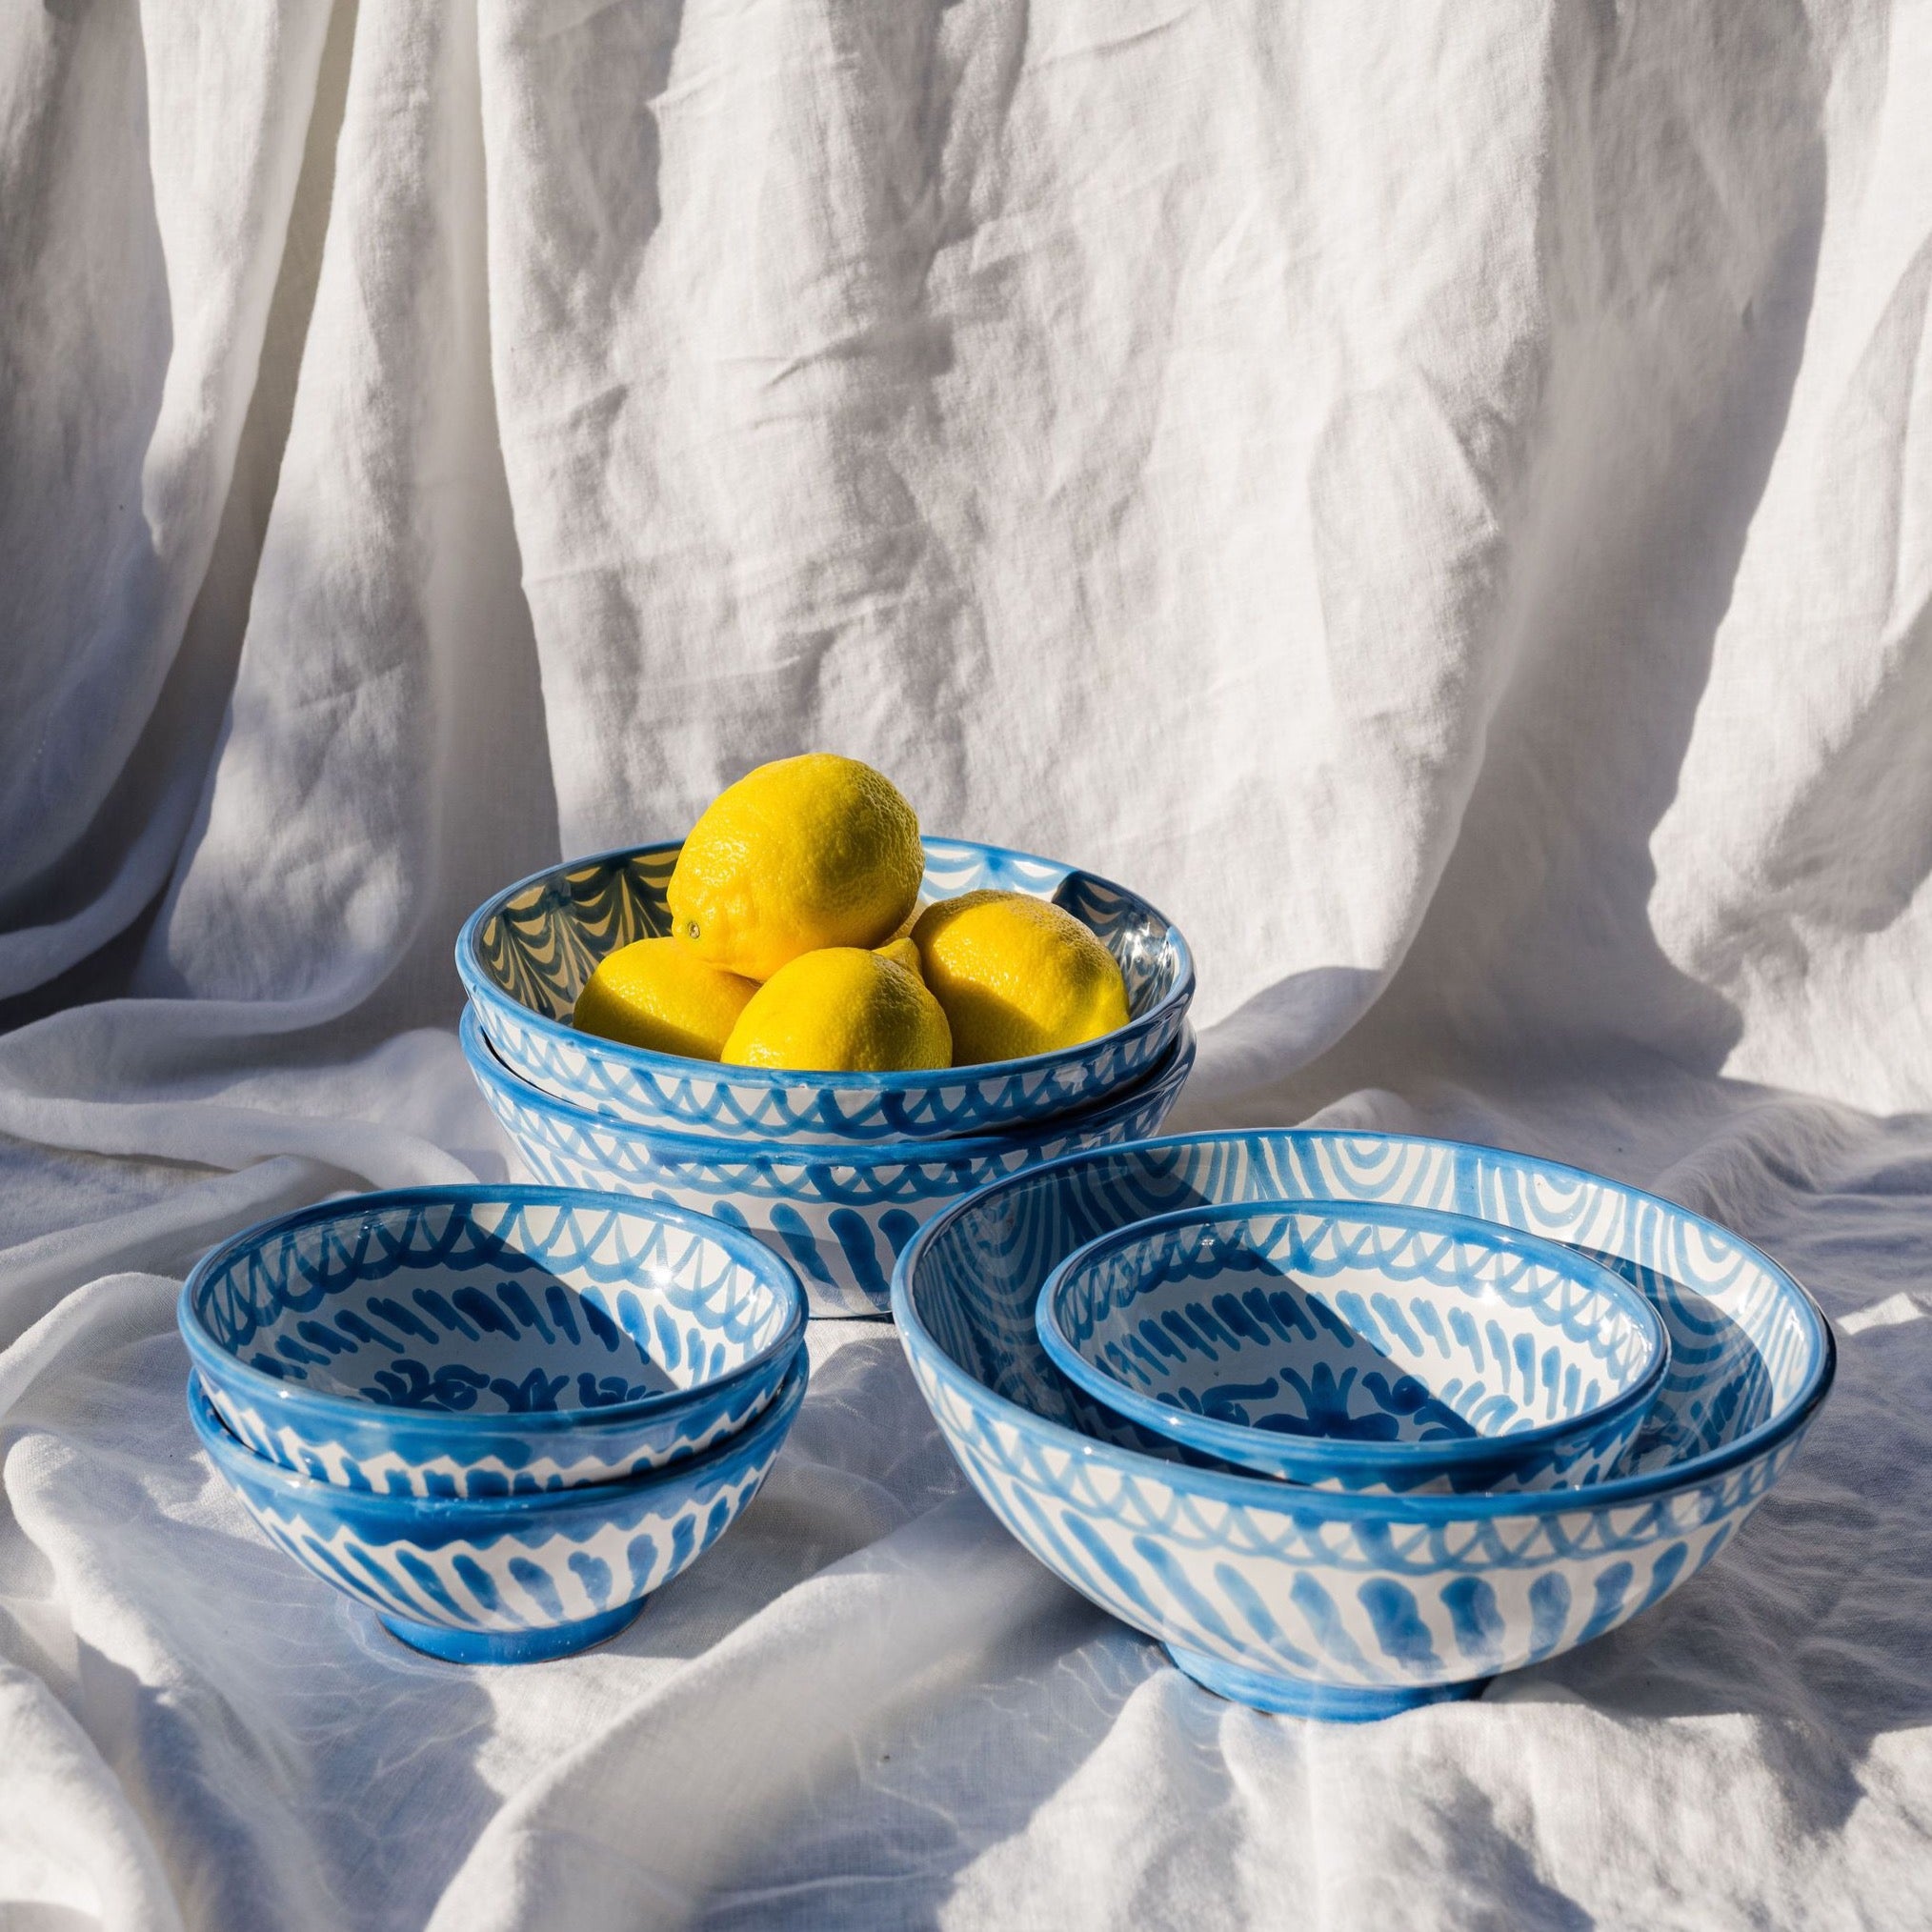 Medium bowl with hand painted designs – Pomelo Casa